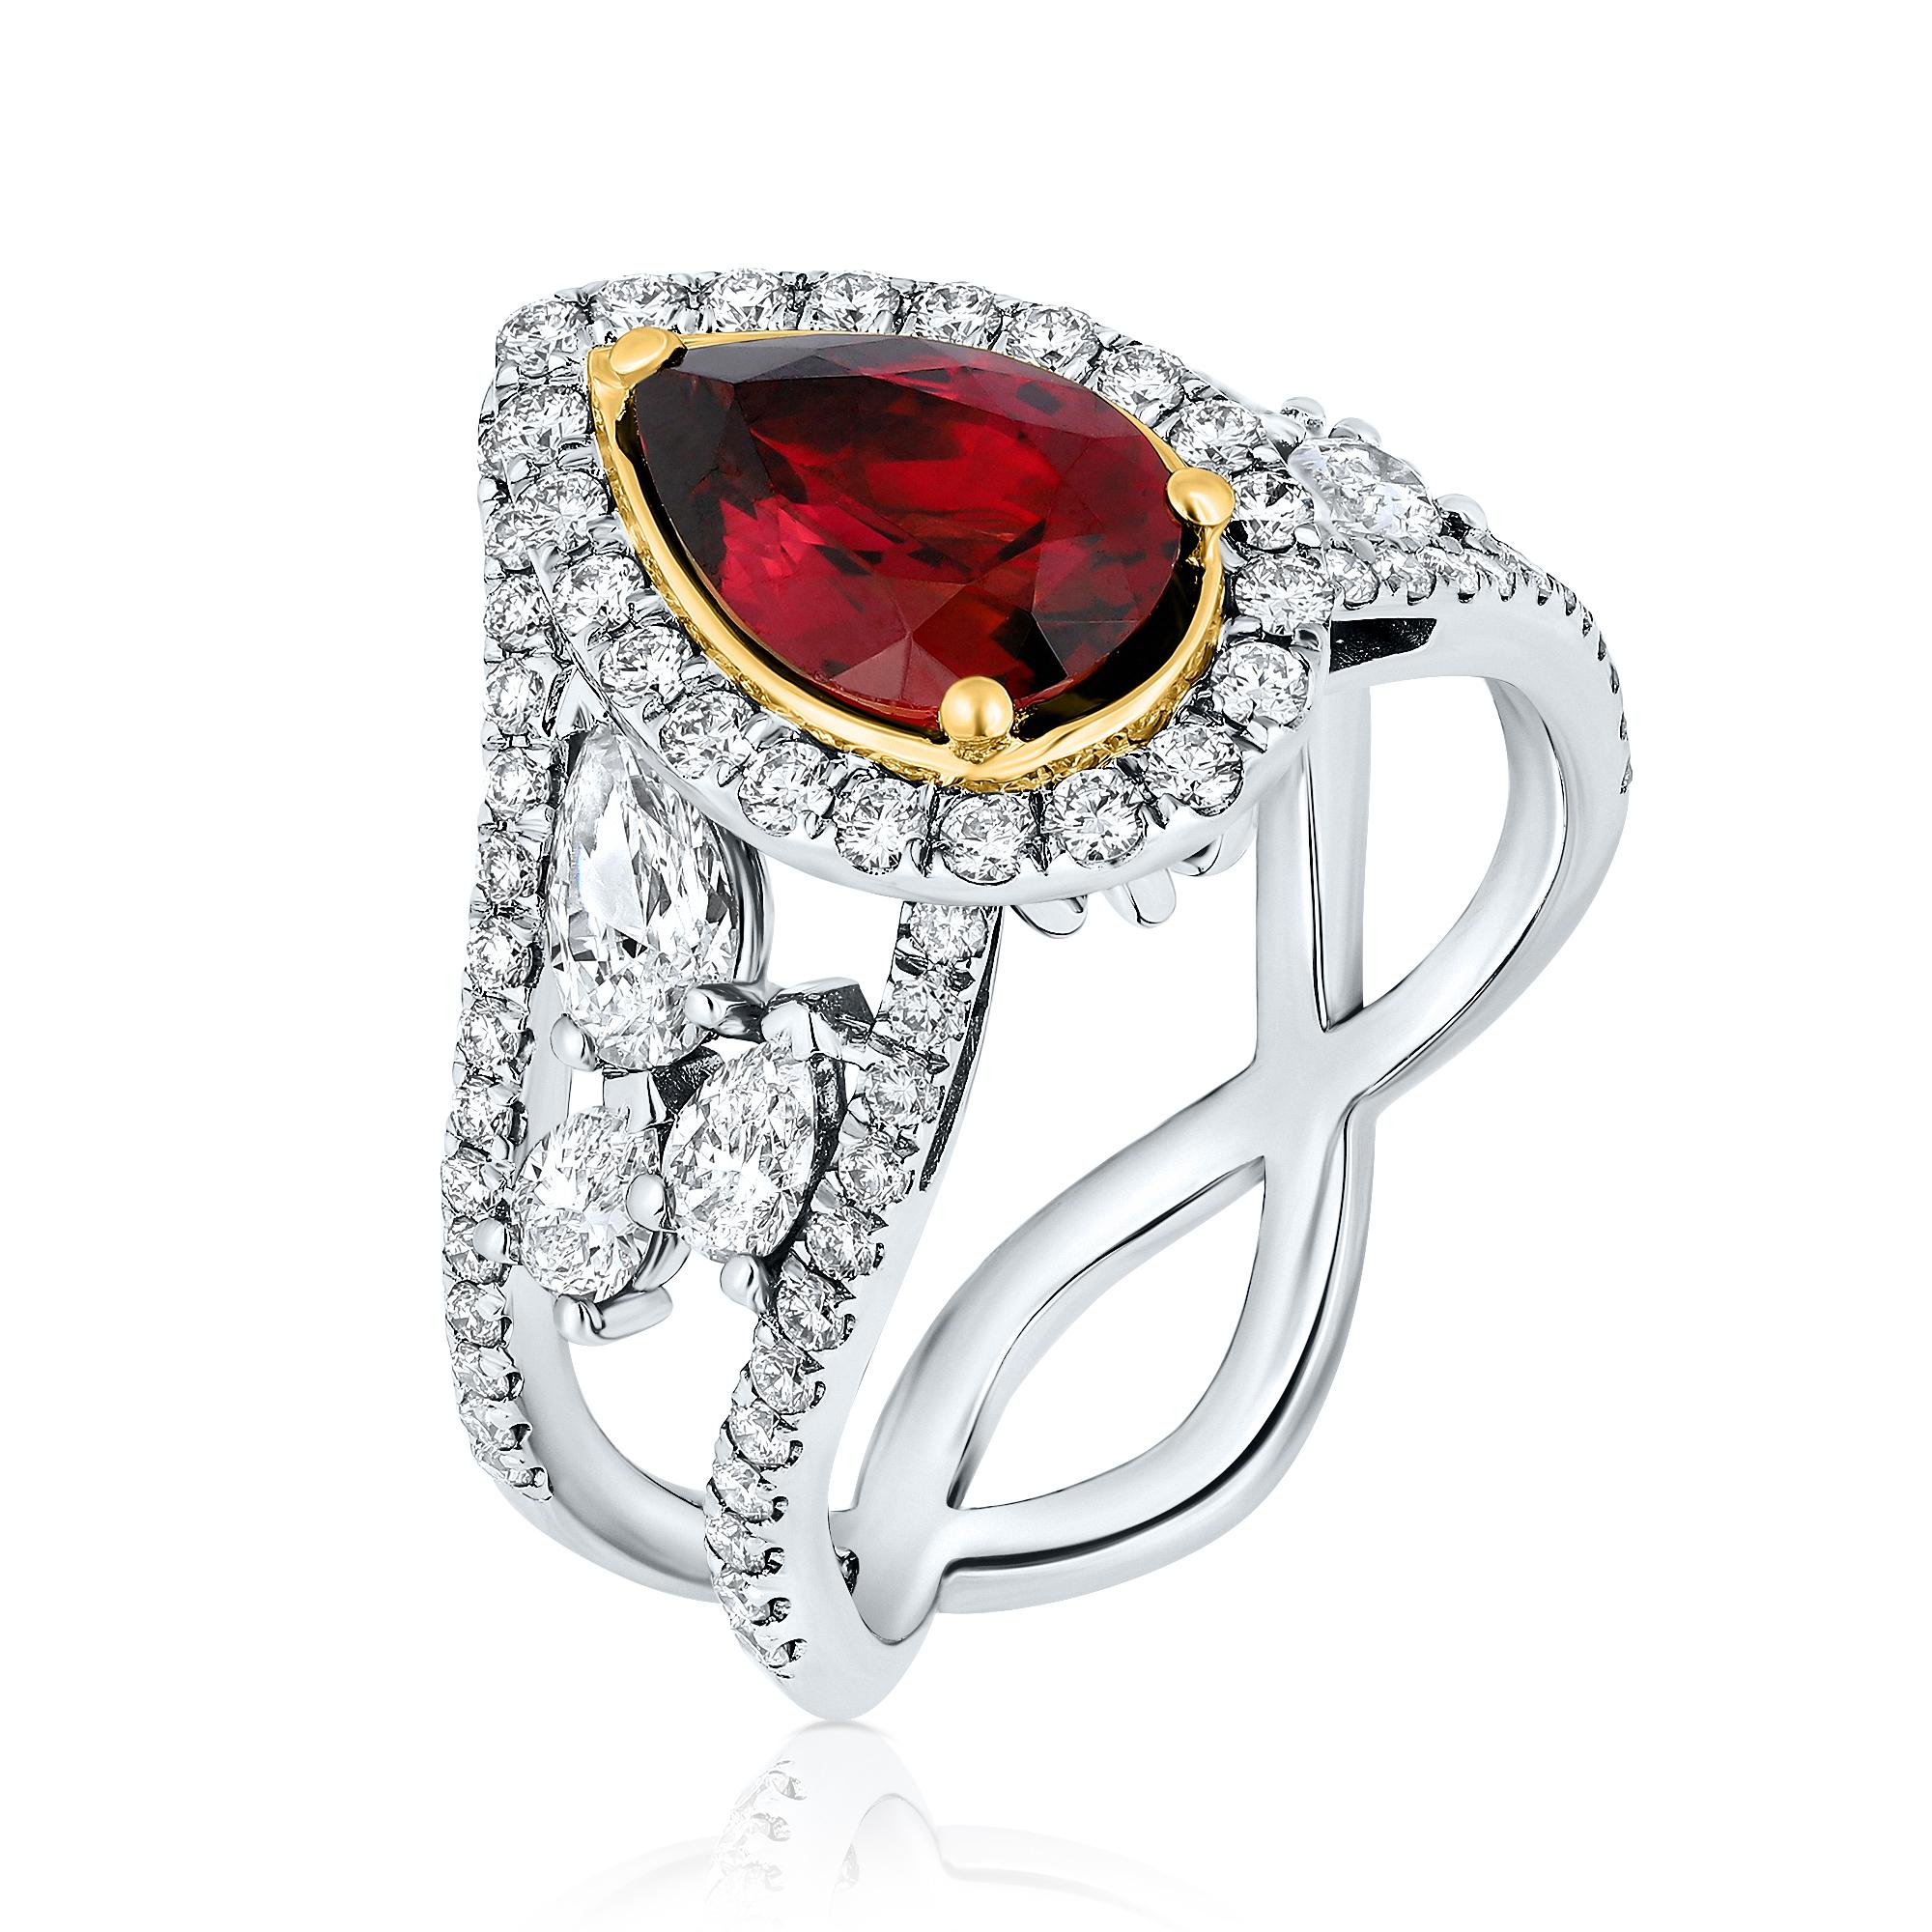 A gorgeous Cocktail ring Showcasing 1.71 Carat pear shaped Red Tourmaline (Rubellite). This exquisite centerpiece is elegantly complemented by a halo of round brilliant Diamonds, which enhance the visual impact of the central stone. To further